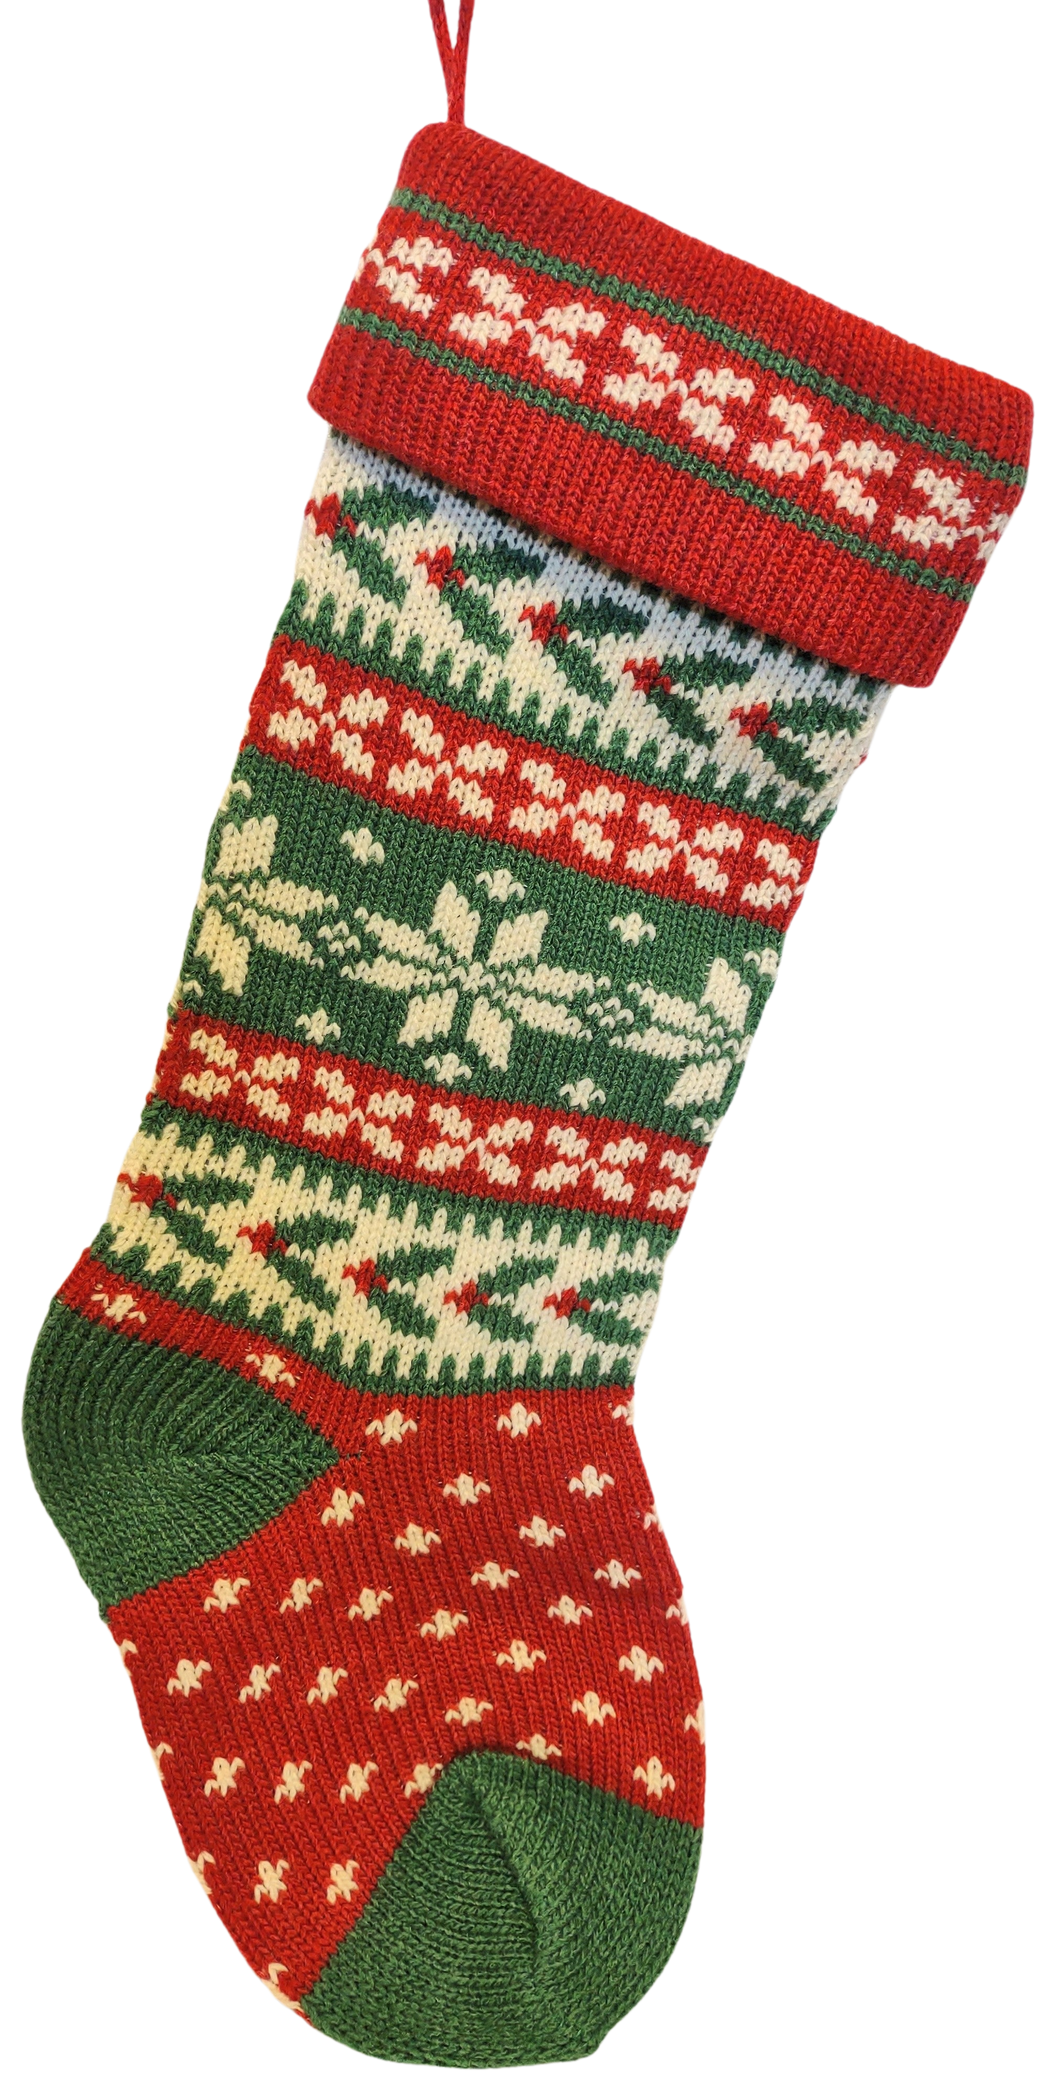 Red/Green/White Heavy Knit Stocking with Snowflakes 20